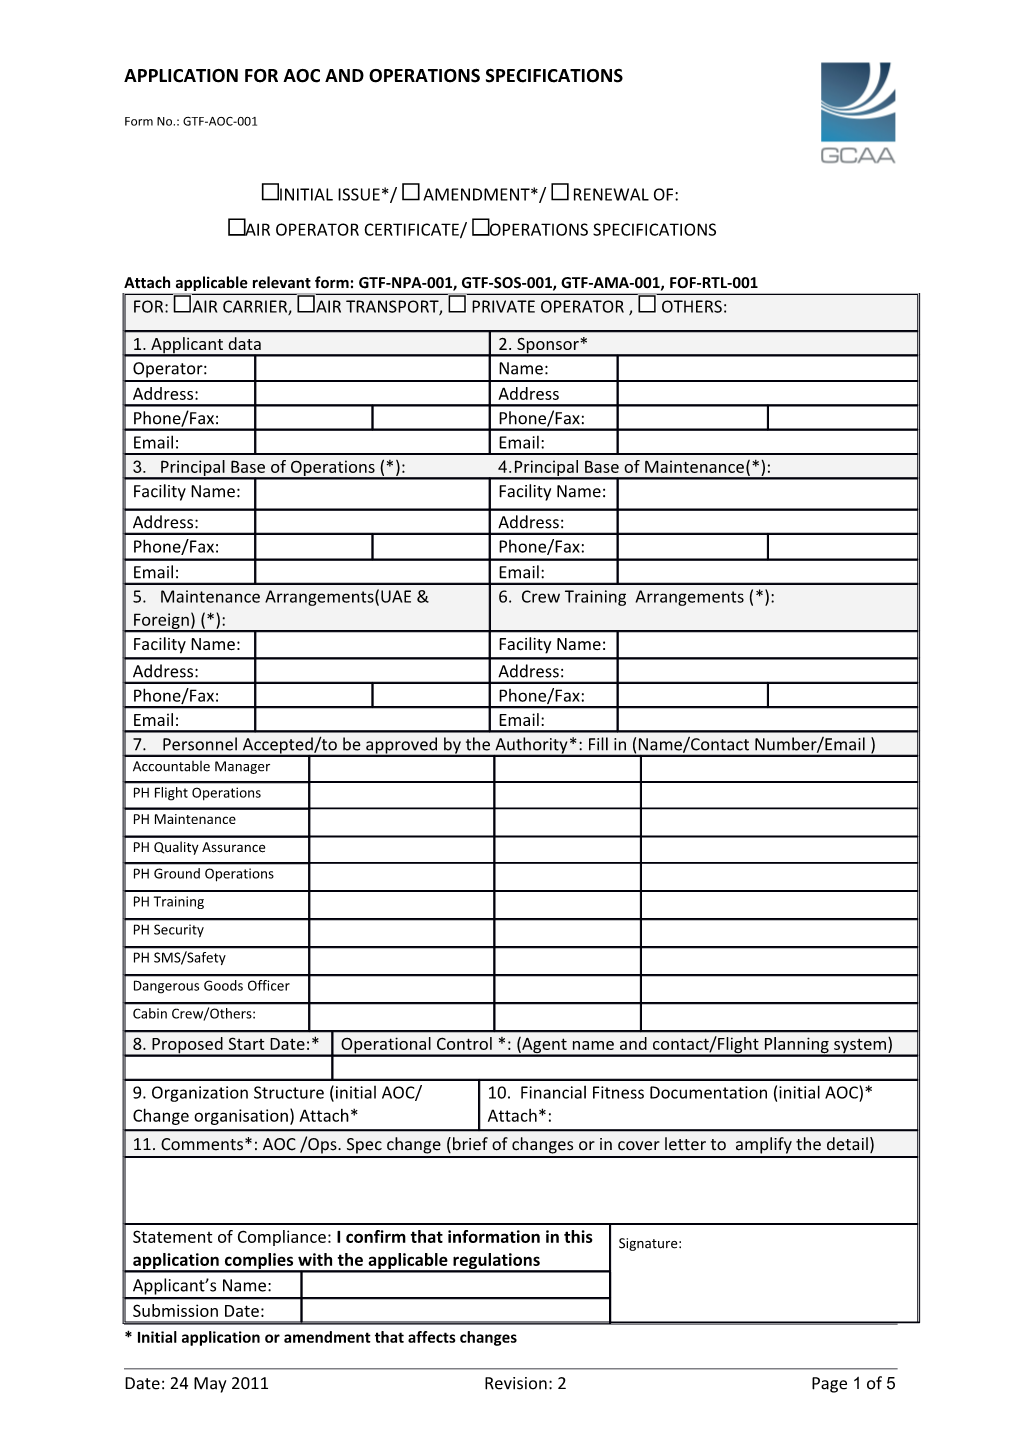 Application for Aoc and Operations Specifications